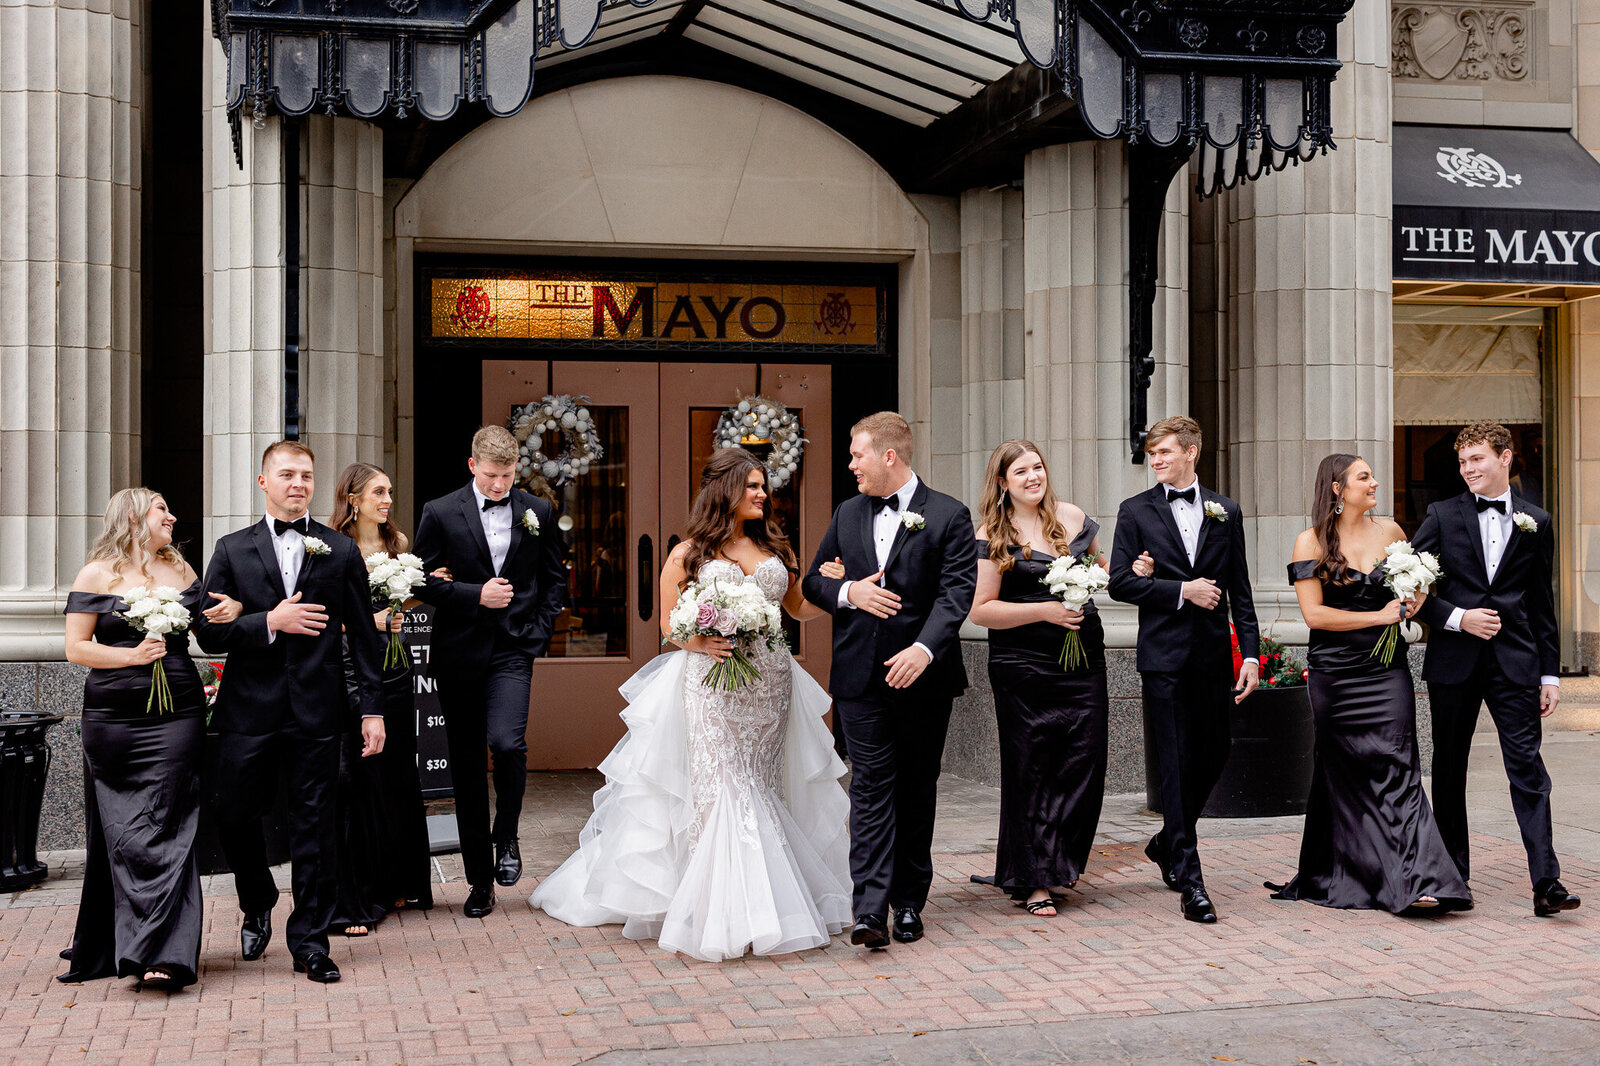 Mayo hotel wedding in downtown Tulsa Oklahoma featuring a black and white themed wedding with black bridesmaids dresses at urban downtown city venue